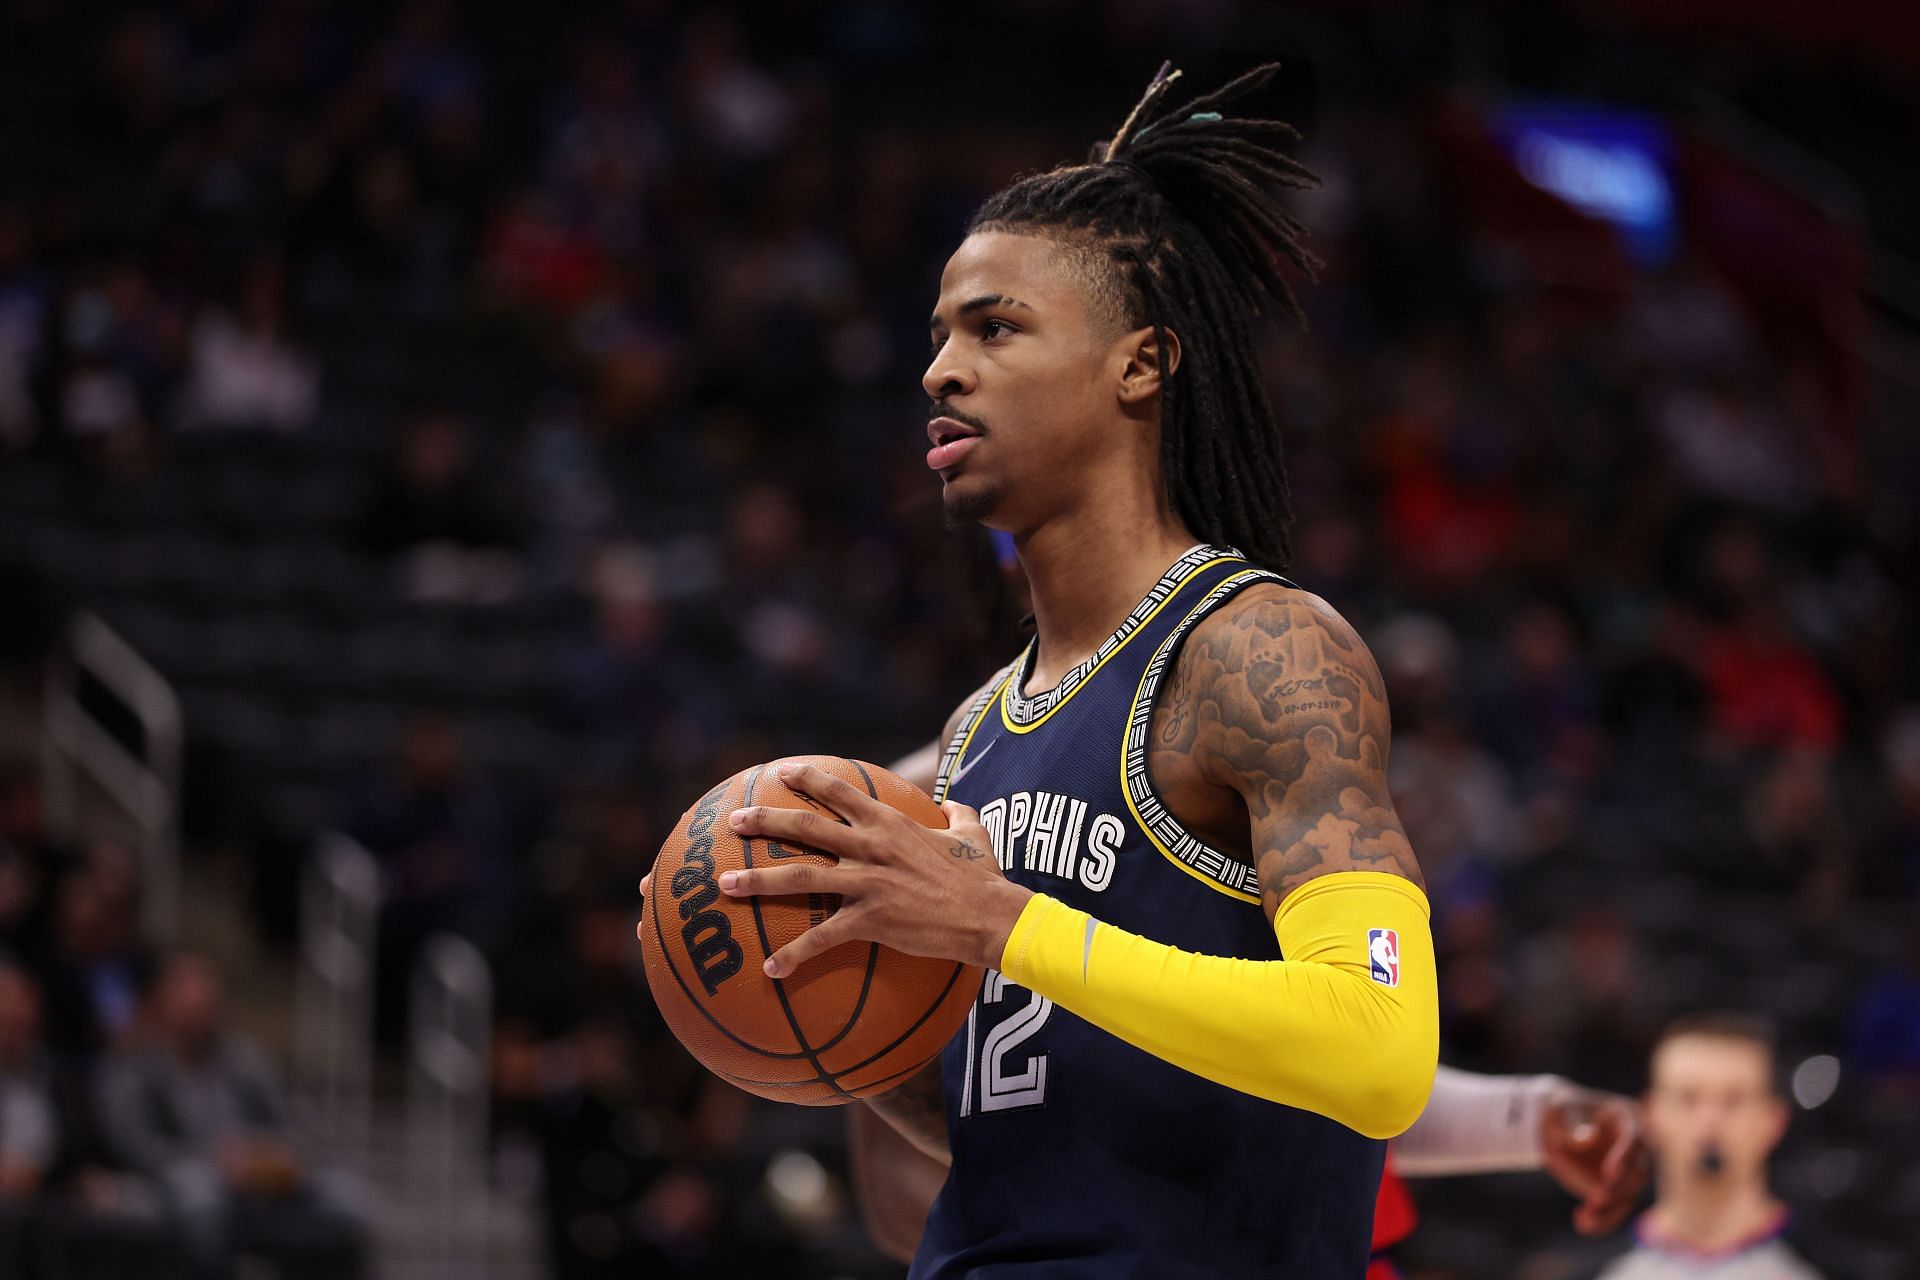 Ja Morant of the Memphis Grizzlies won the NBA Most Improved Player award this season